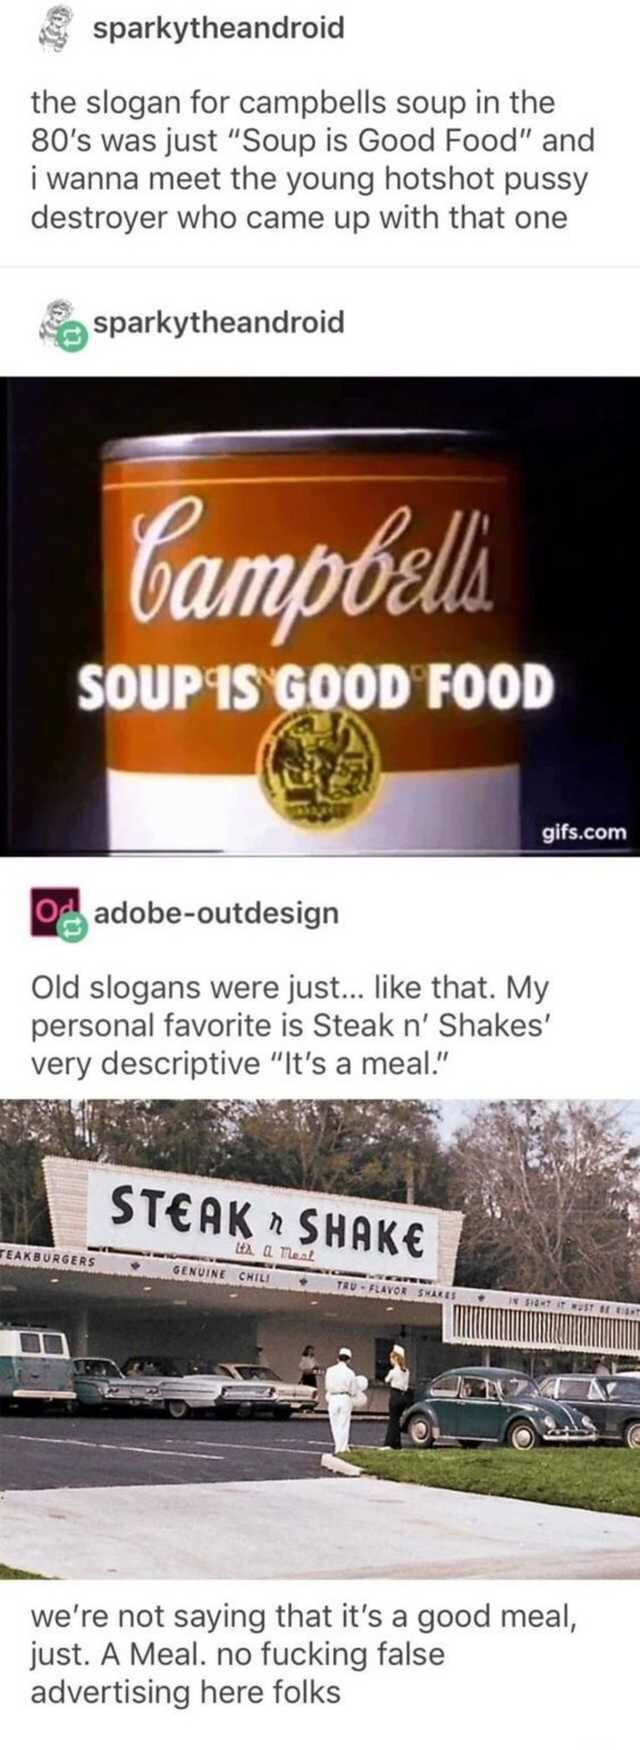 campbell soup - sparkytheandroid the slogan for campbells soup in the 80's was just "Soup is Good Food" and i wanna meet the young hotshot pussy destroyer who came up with that one sparkytheandroid Campbells Soup Is Good Food gifs.com adobeoutdesign Old s